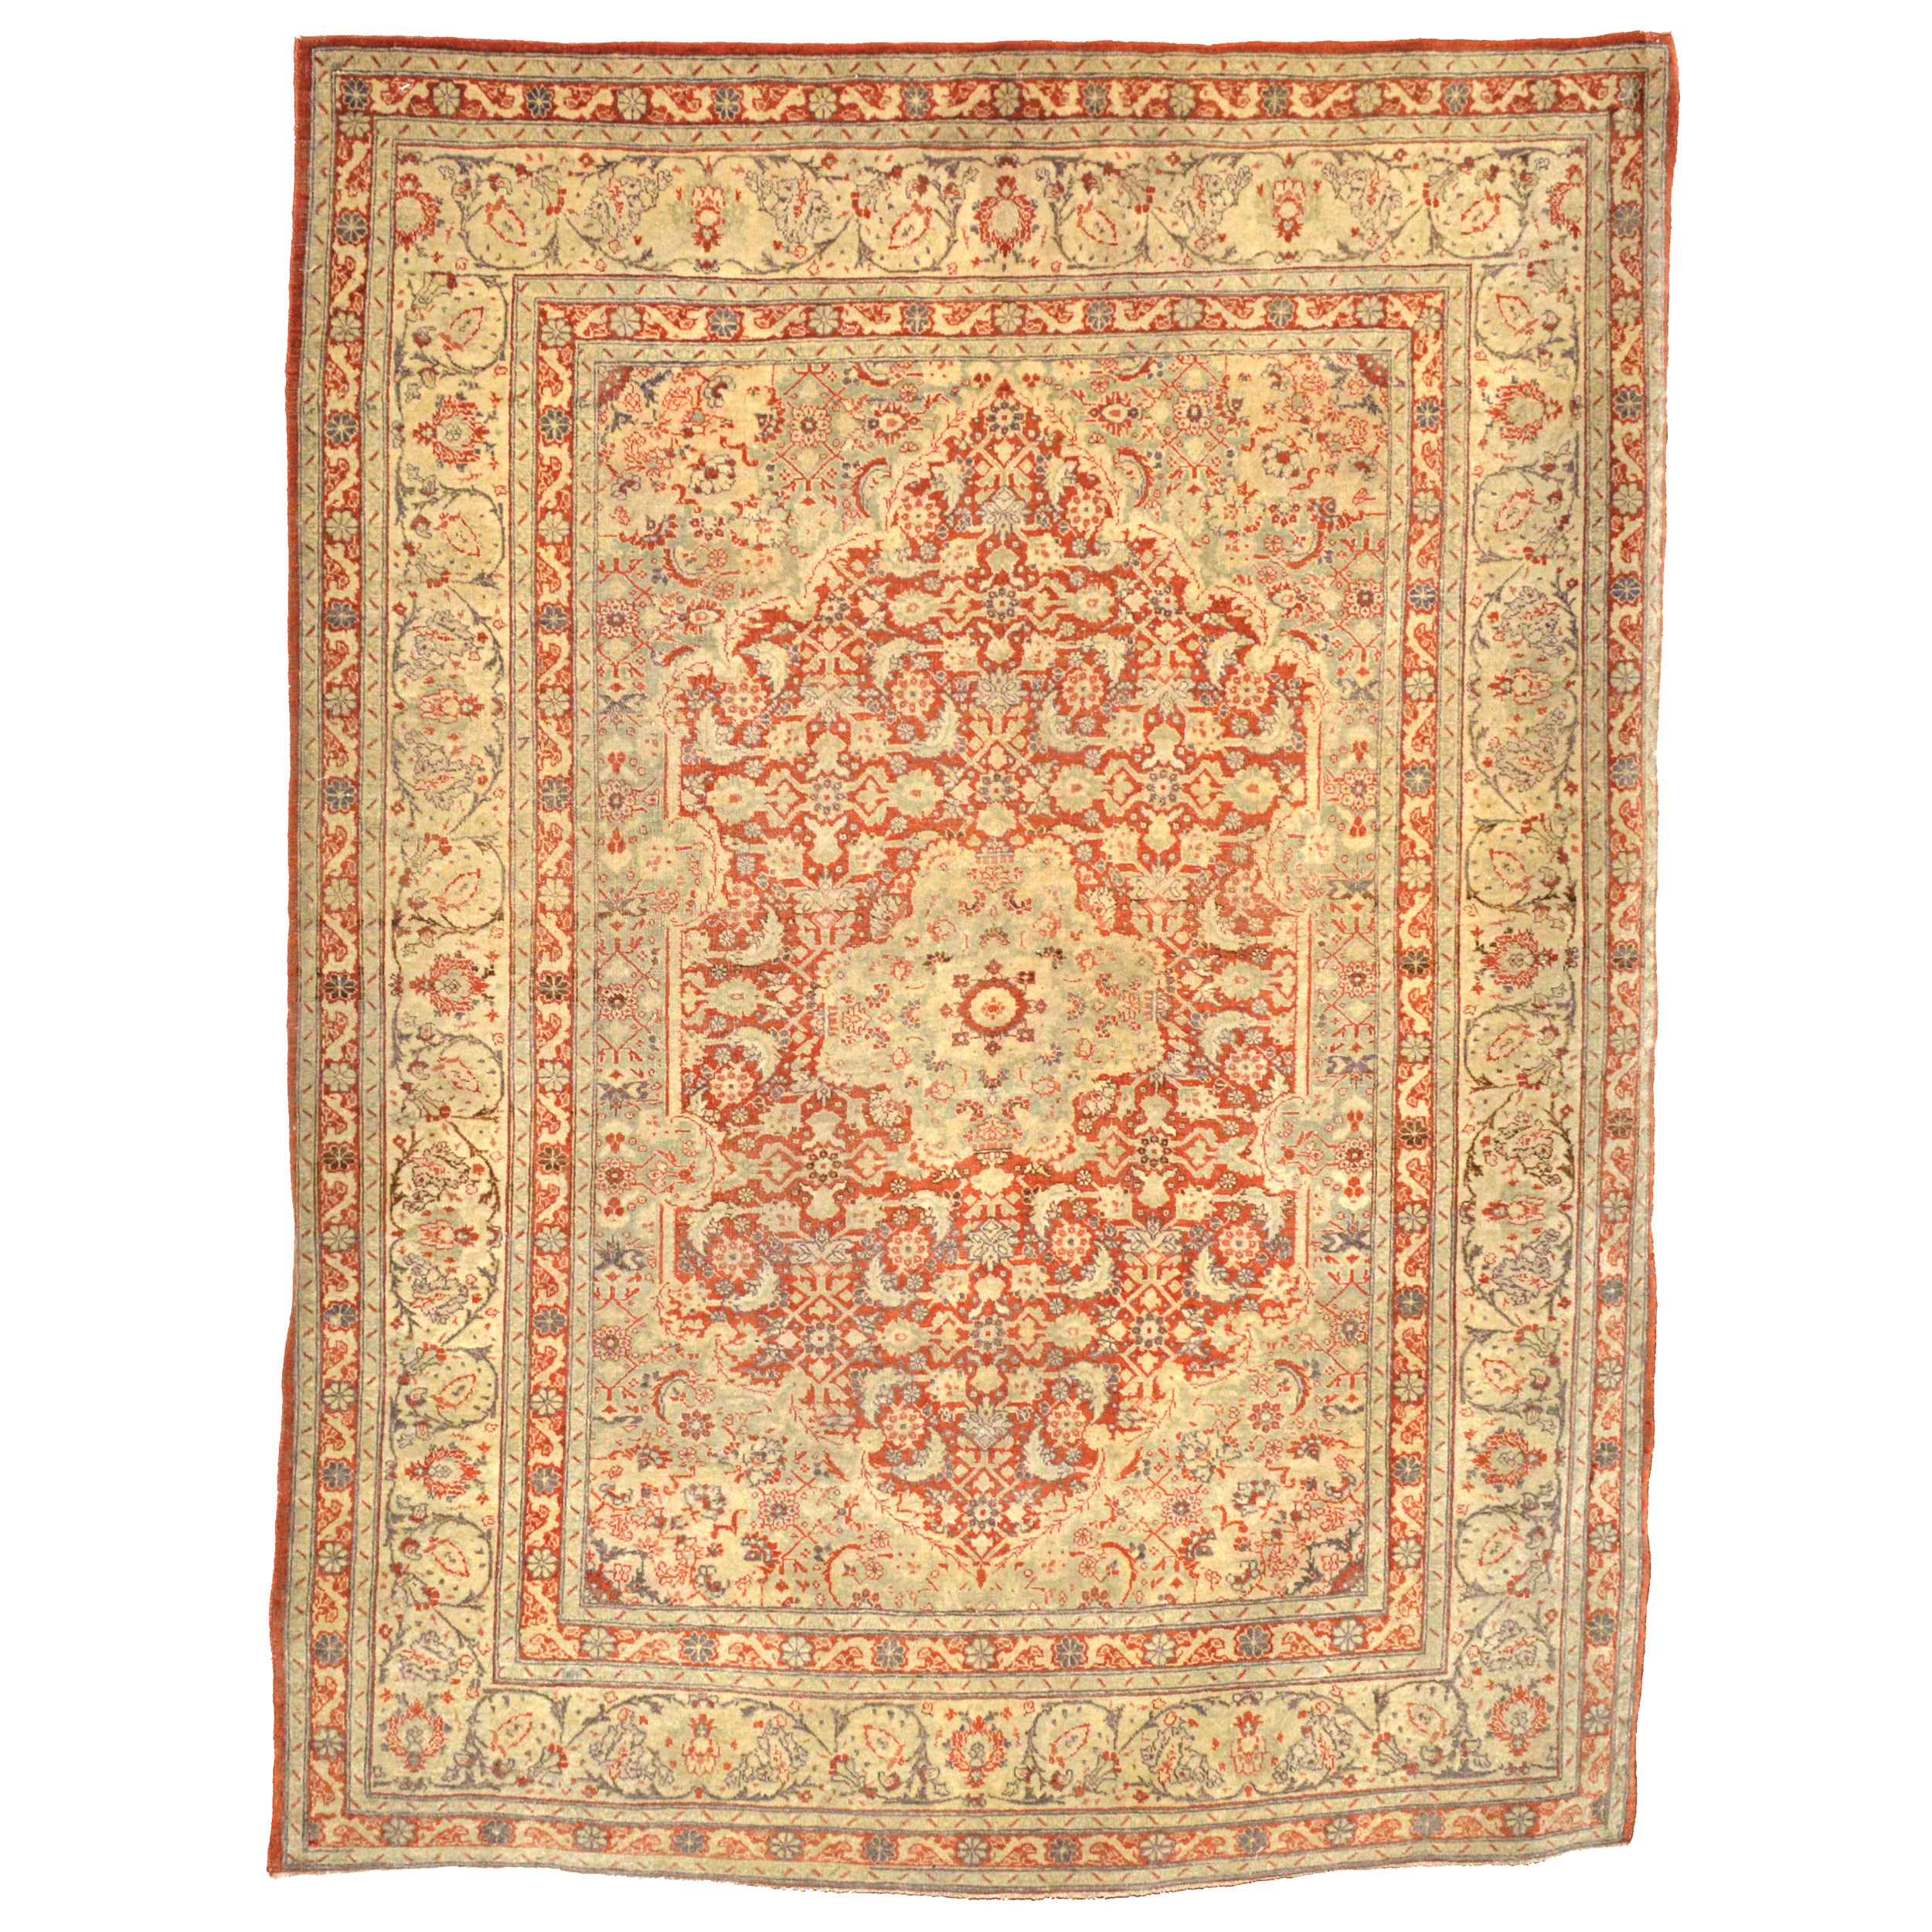 Antique Persian Tabriz with the classical Herati design on a soft salmon-red field framed by an ivory border, circa 1895 - Douglas Stock Gallery, antique rugs Boston,MA area, antique rugs Wellesley / Natick area